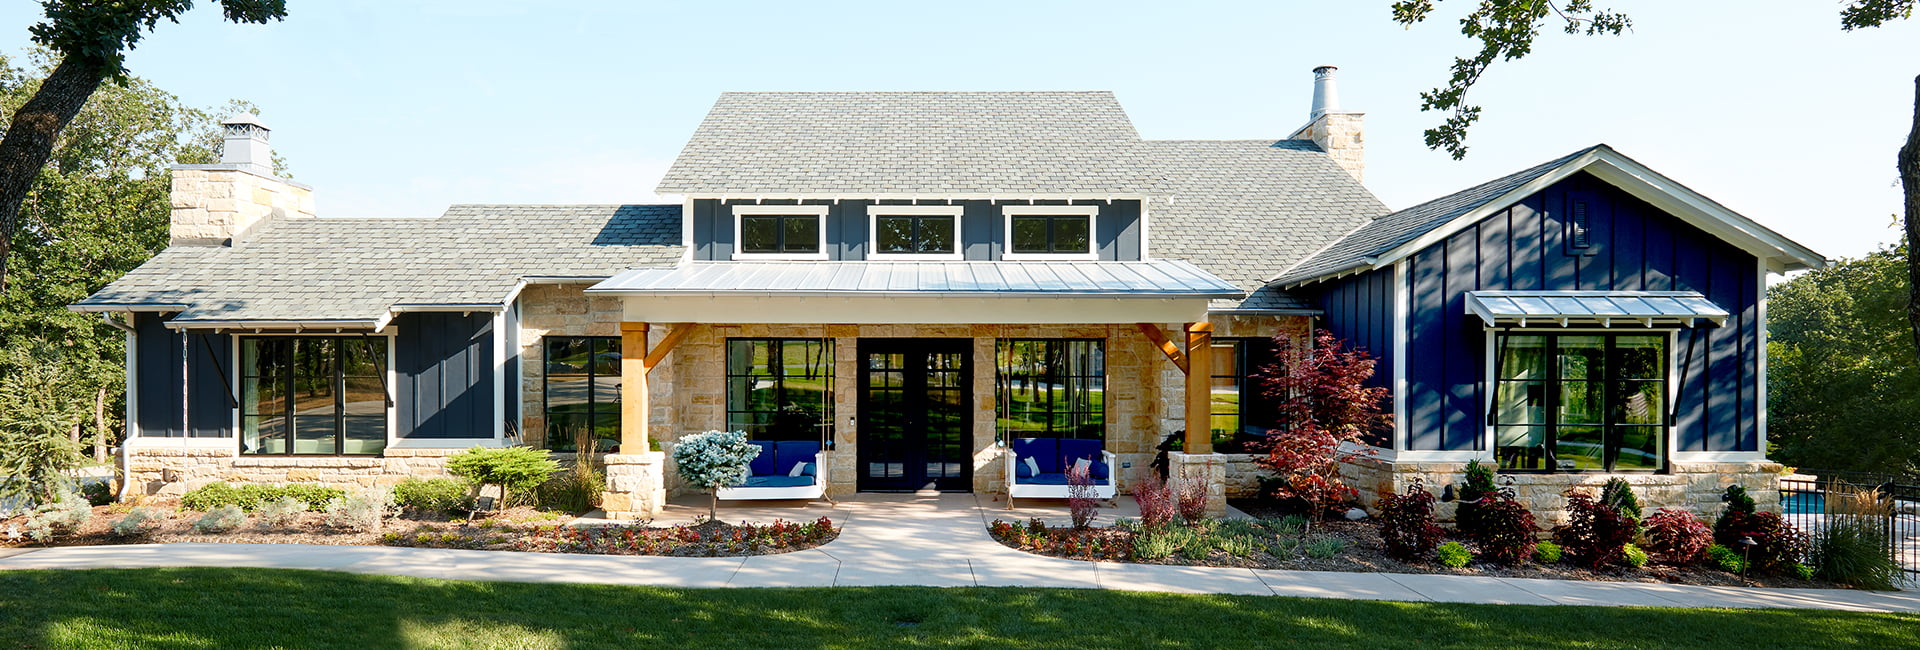 exterior of a new home with brick and siding, and featuring new Lifestyle Series windows